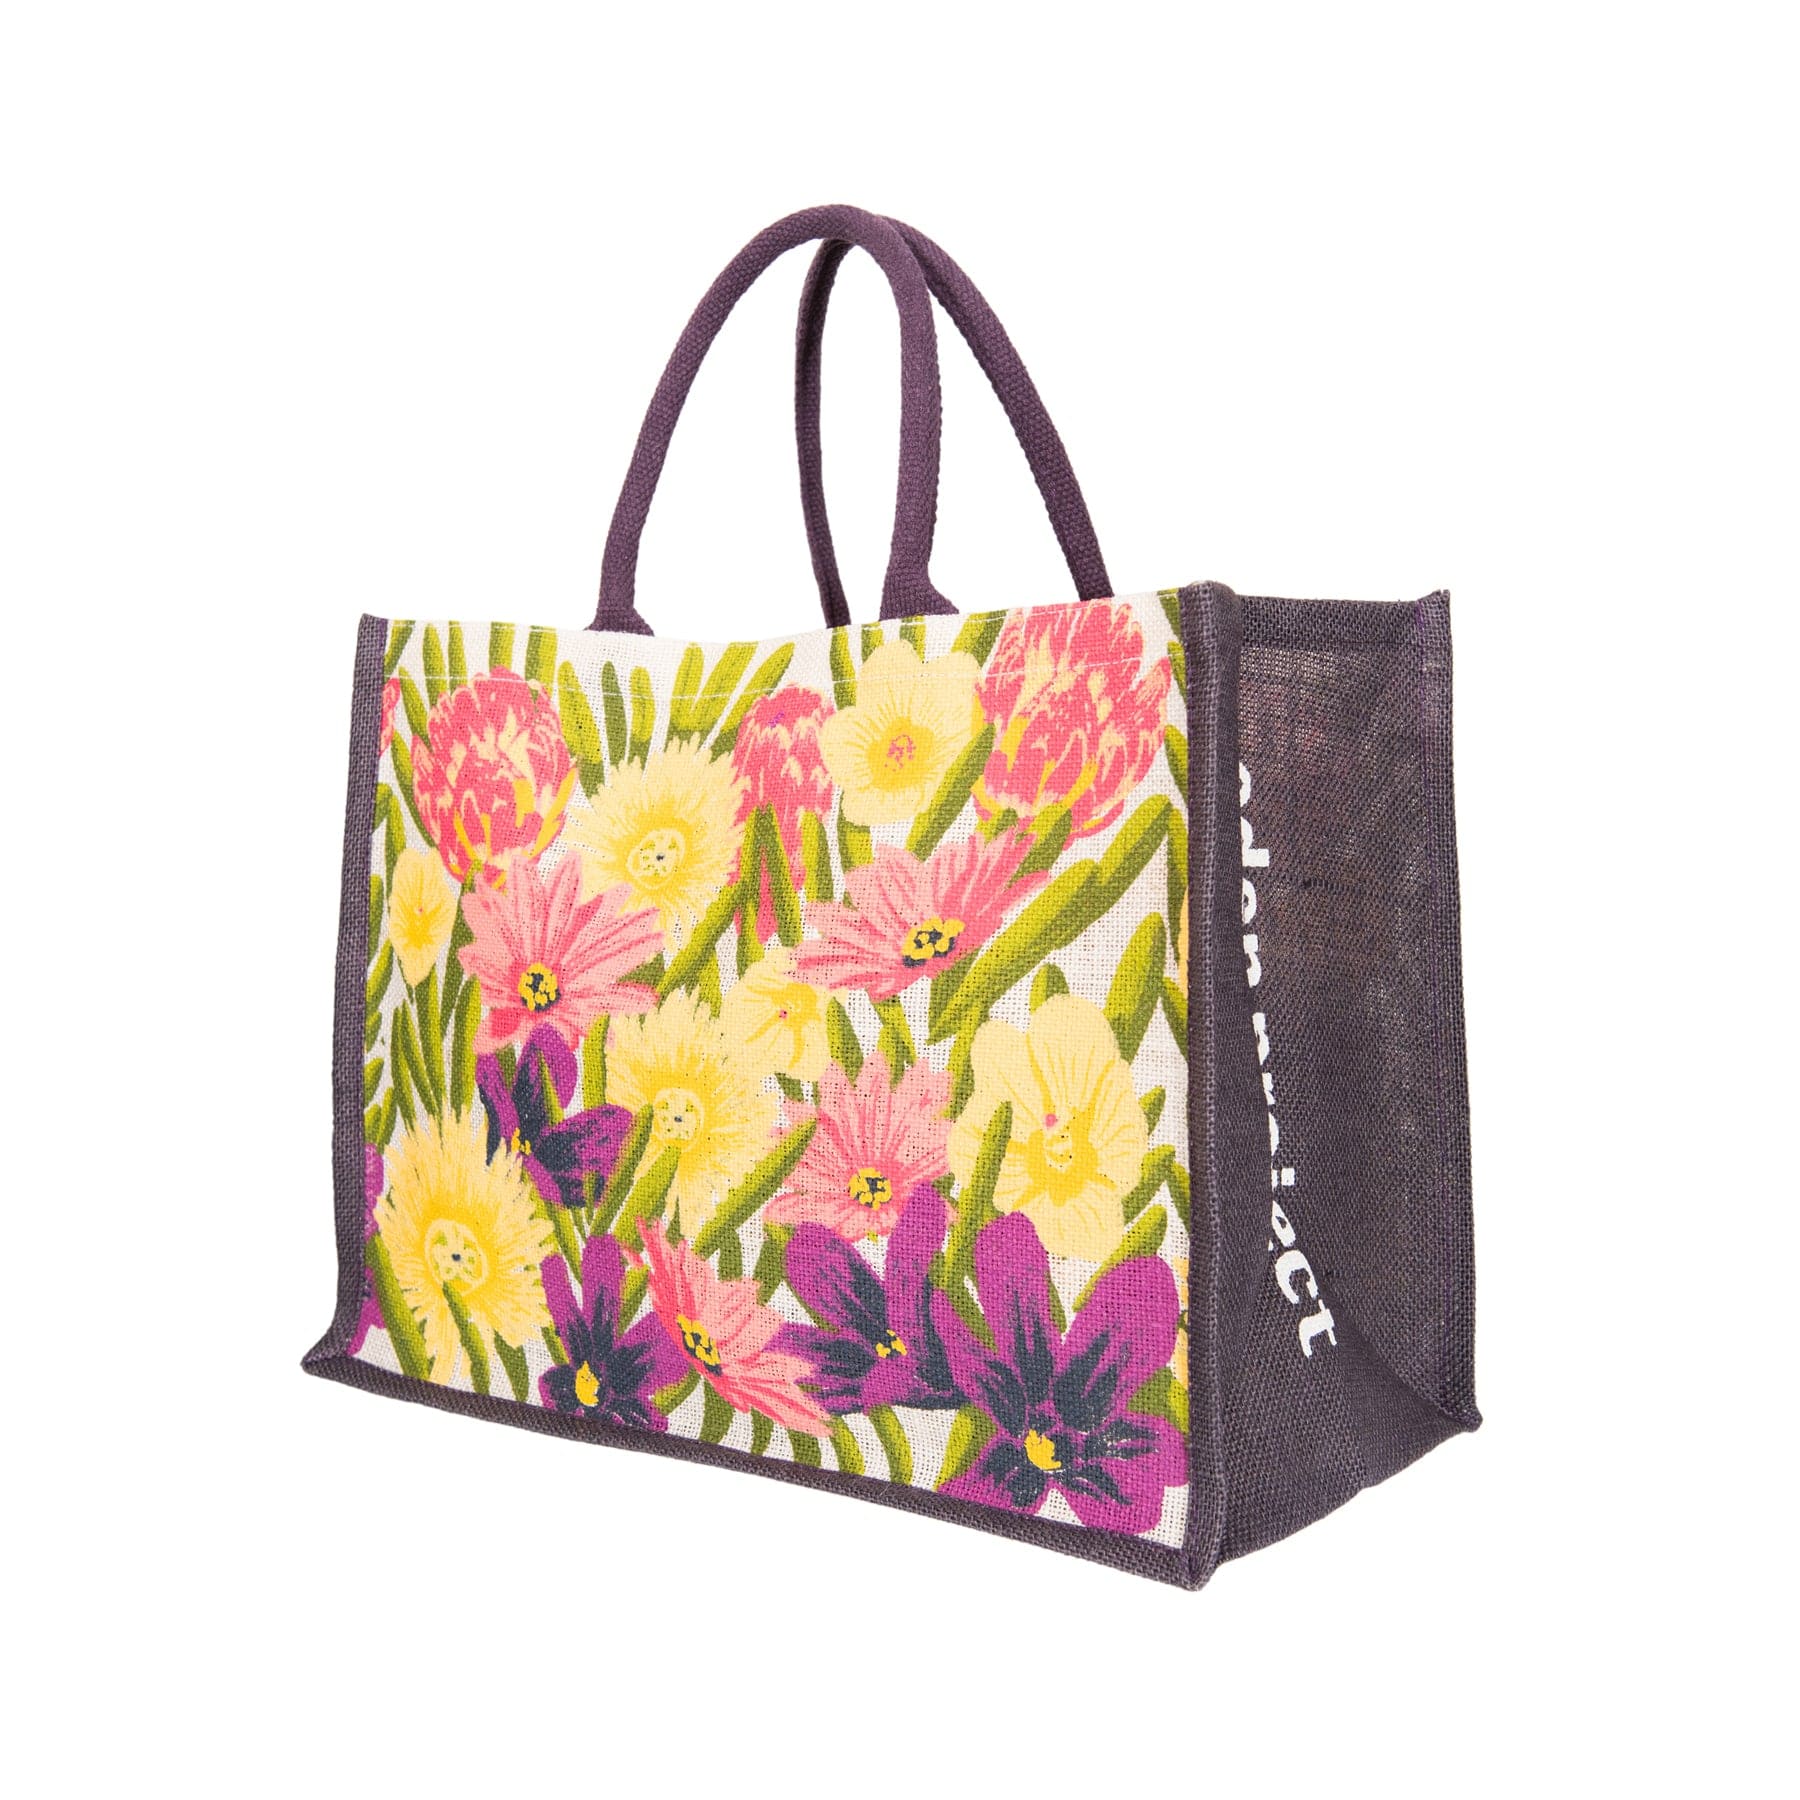 Floral patterned reusable shopping tote bag with sturdy purple handles on a white background